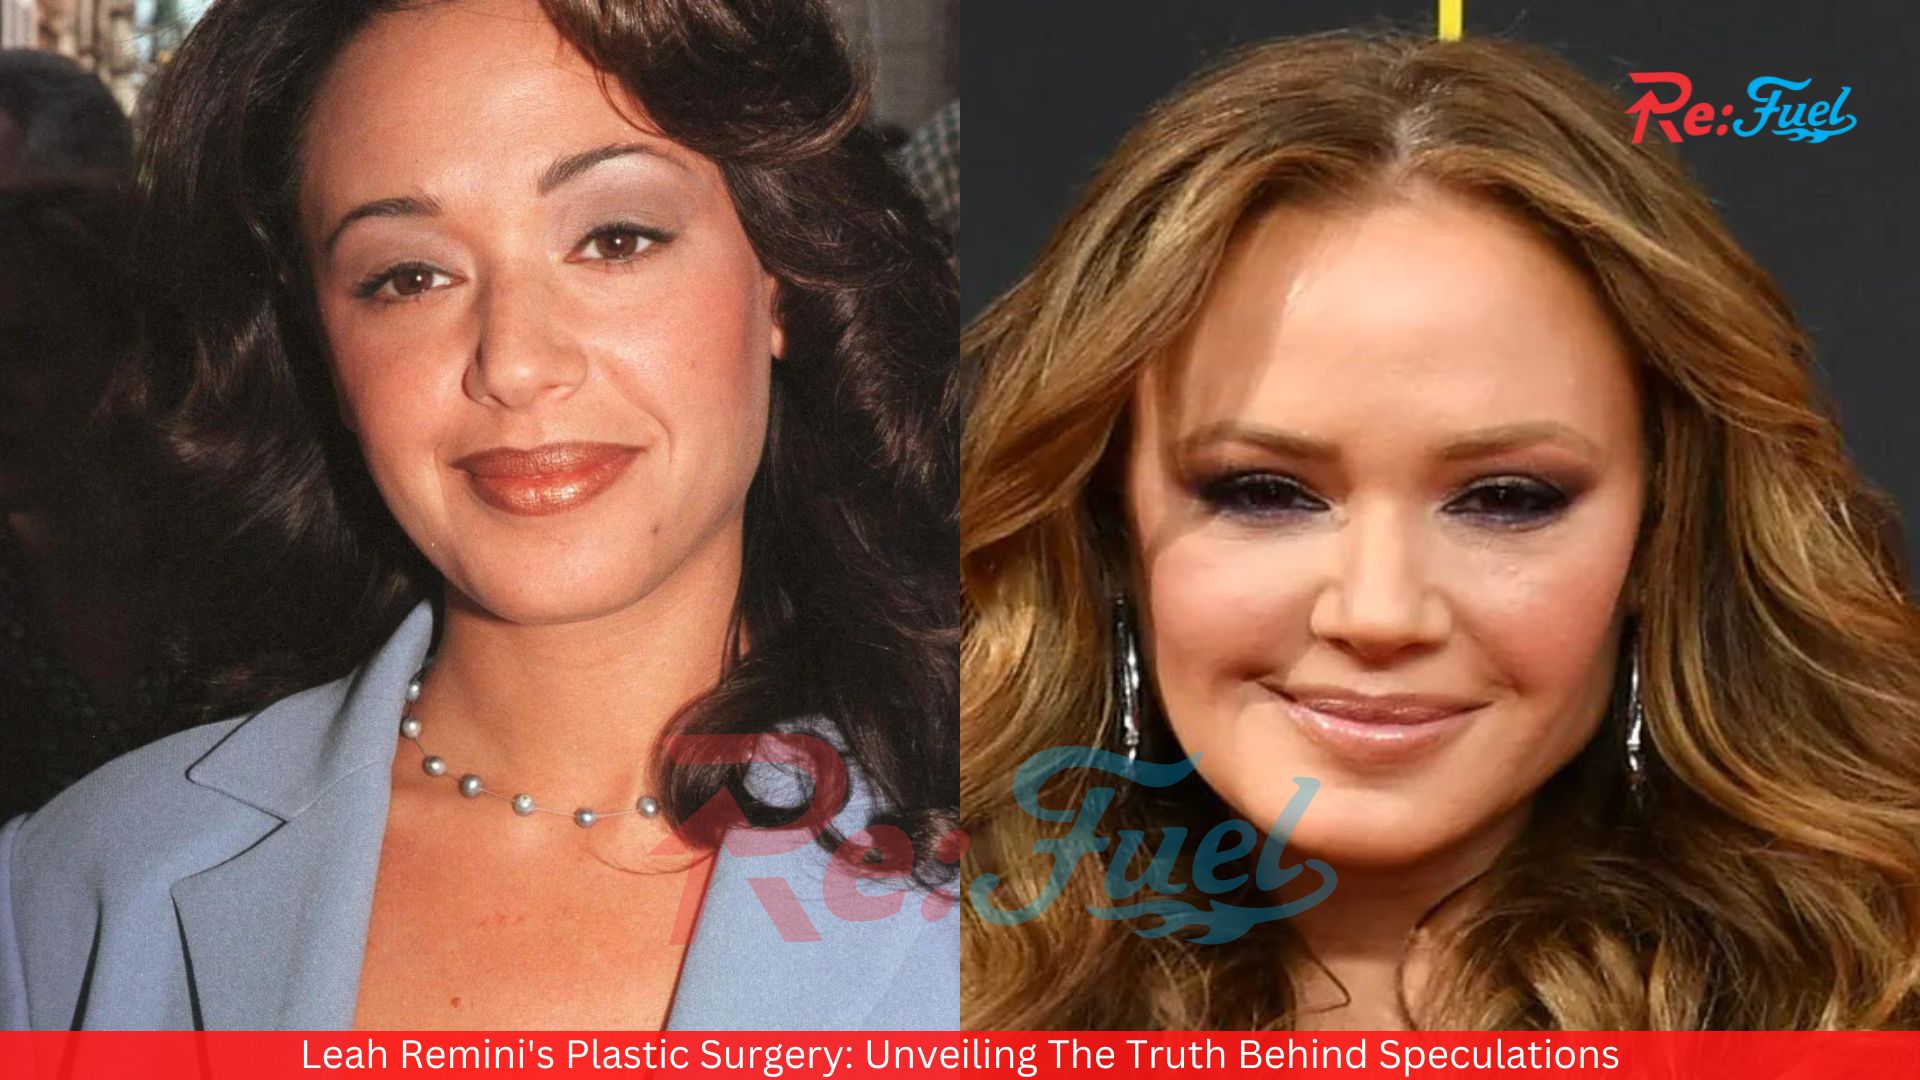 Leah Remini's Plastic Surgery: Unveiling The Truth Behind Speculations